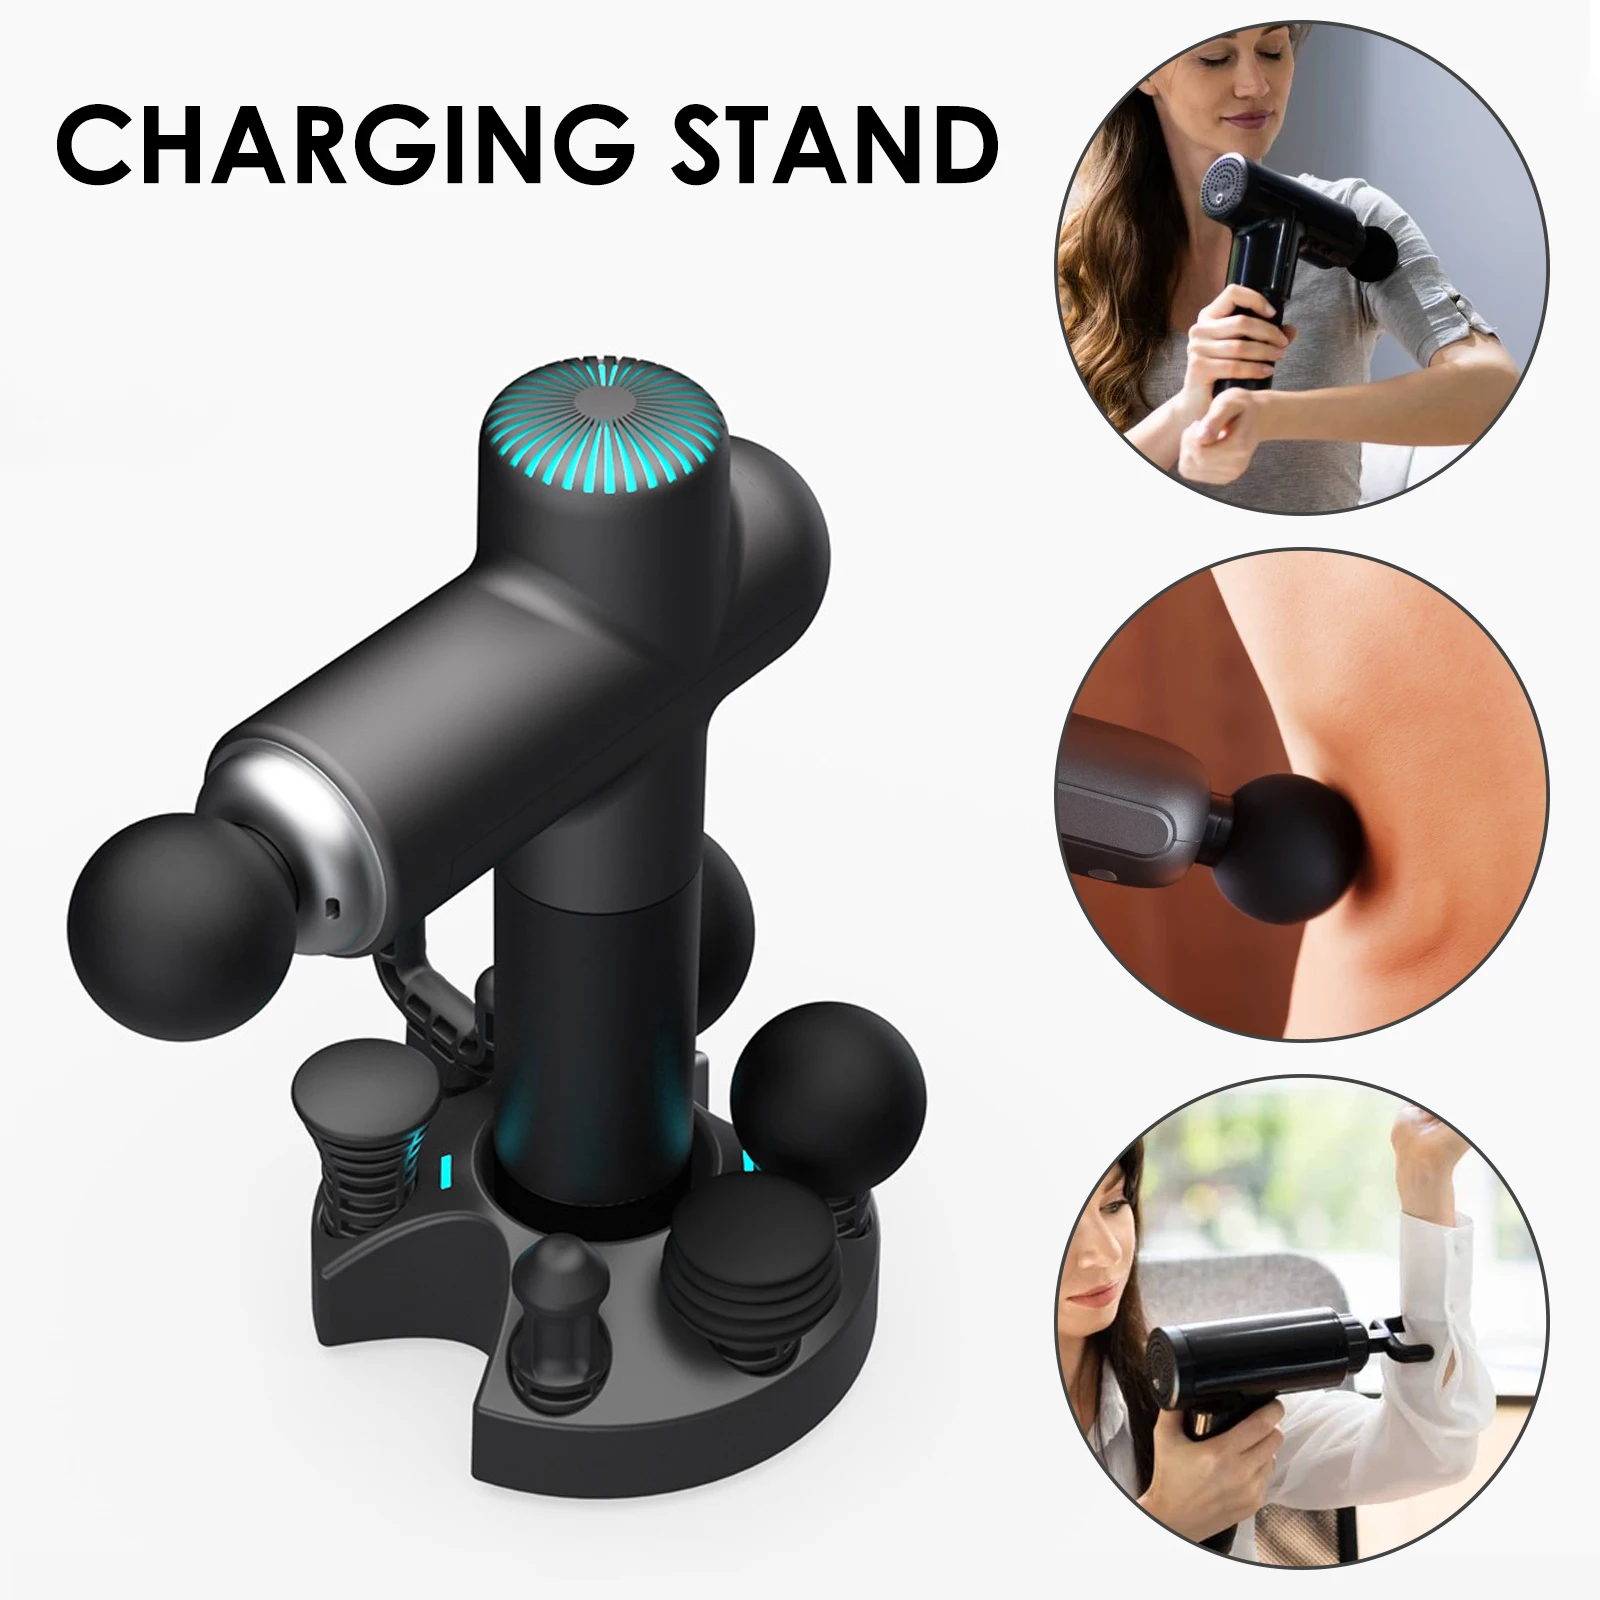 

Booster Wireless Charging Dock Charging Stand For Booster Massage Gun A2/ Lightsaber/U1 24V 1A Fast Wireless Charger